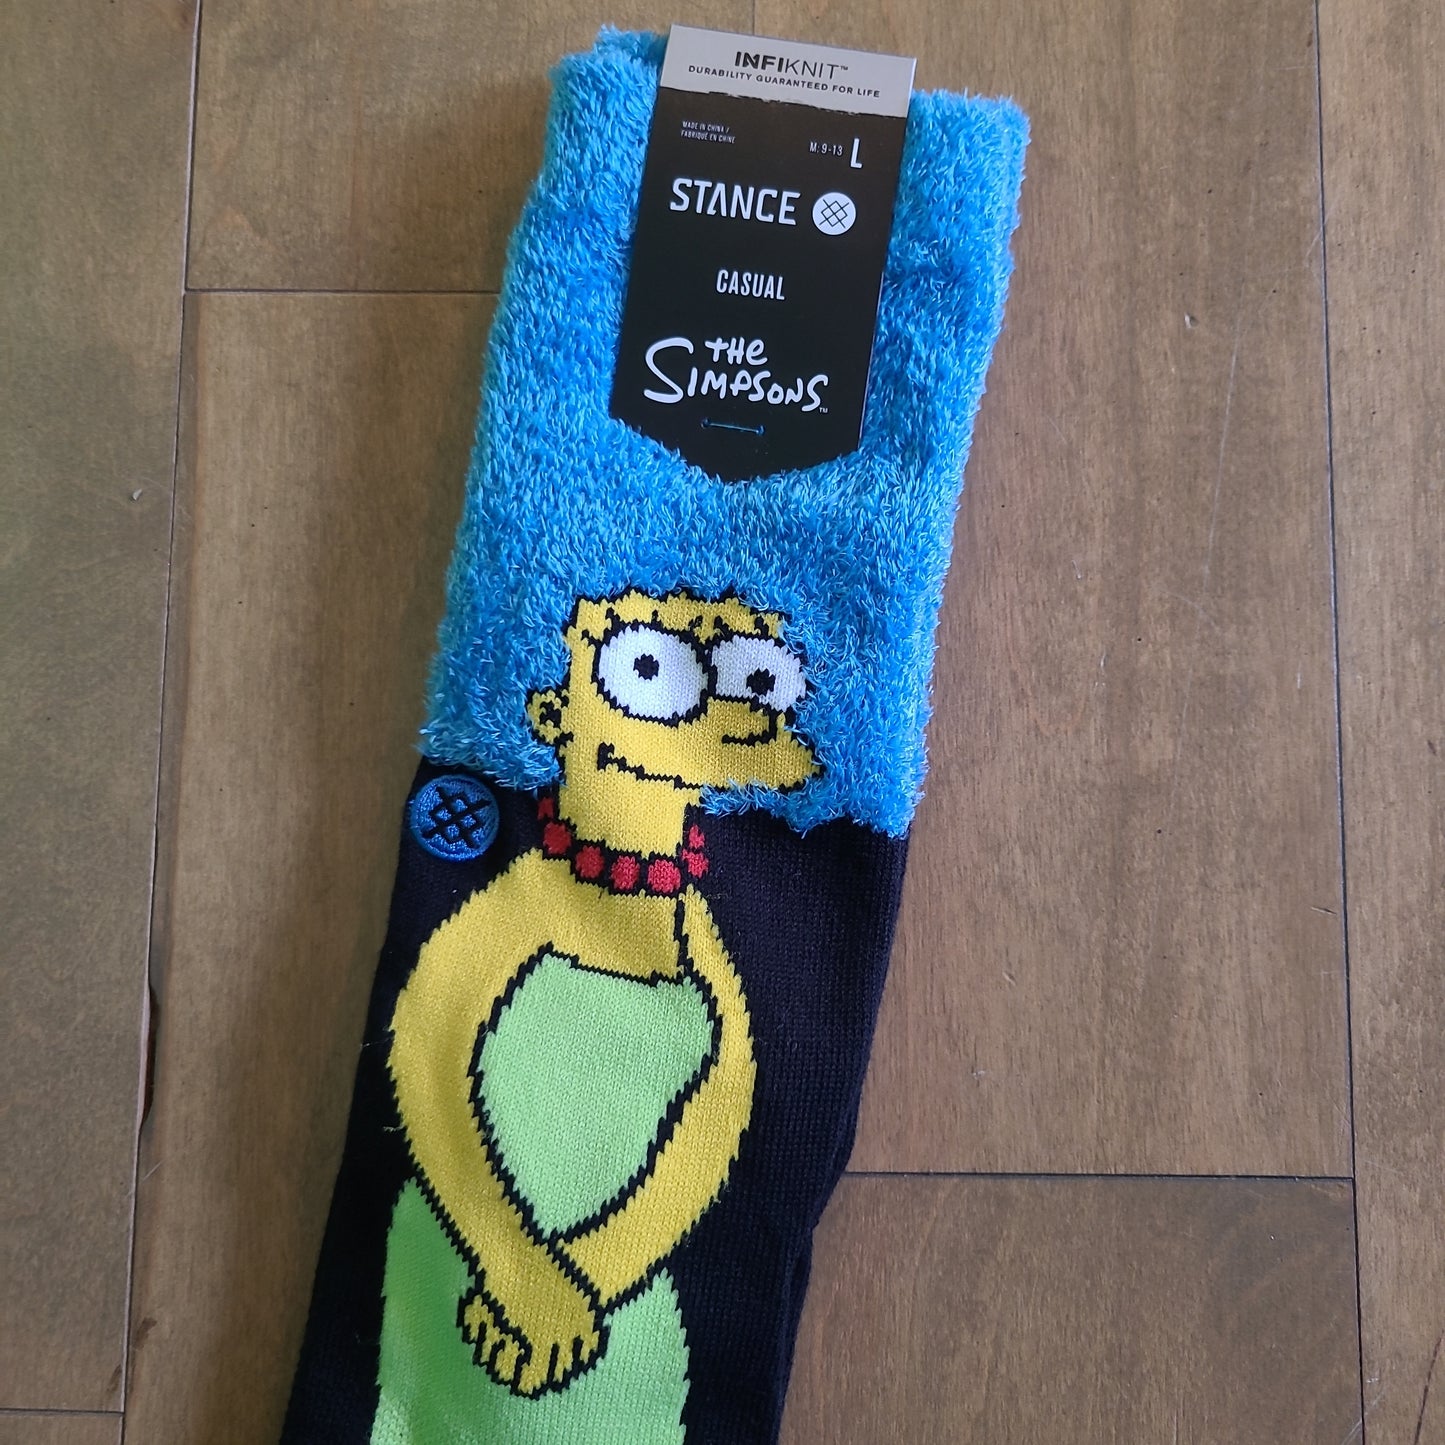 Stance x The Simpsons - Marge Casual Crew Socks